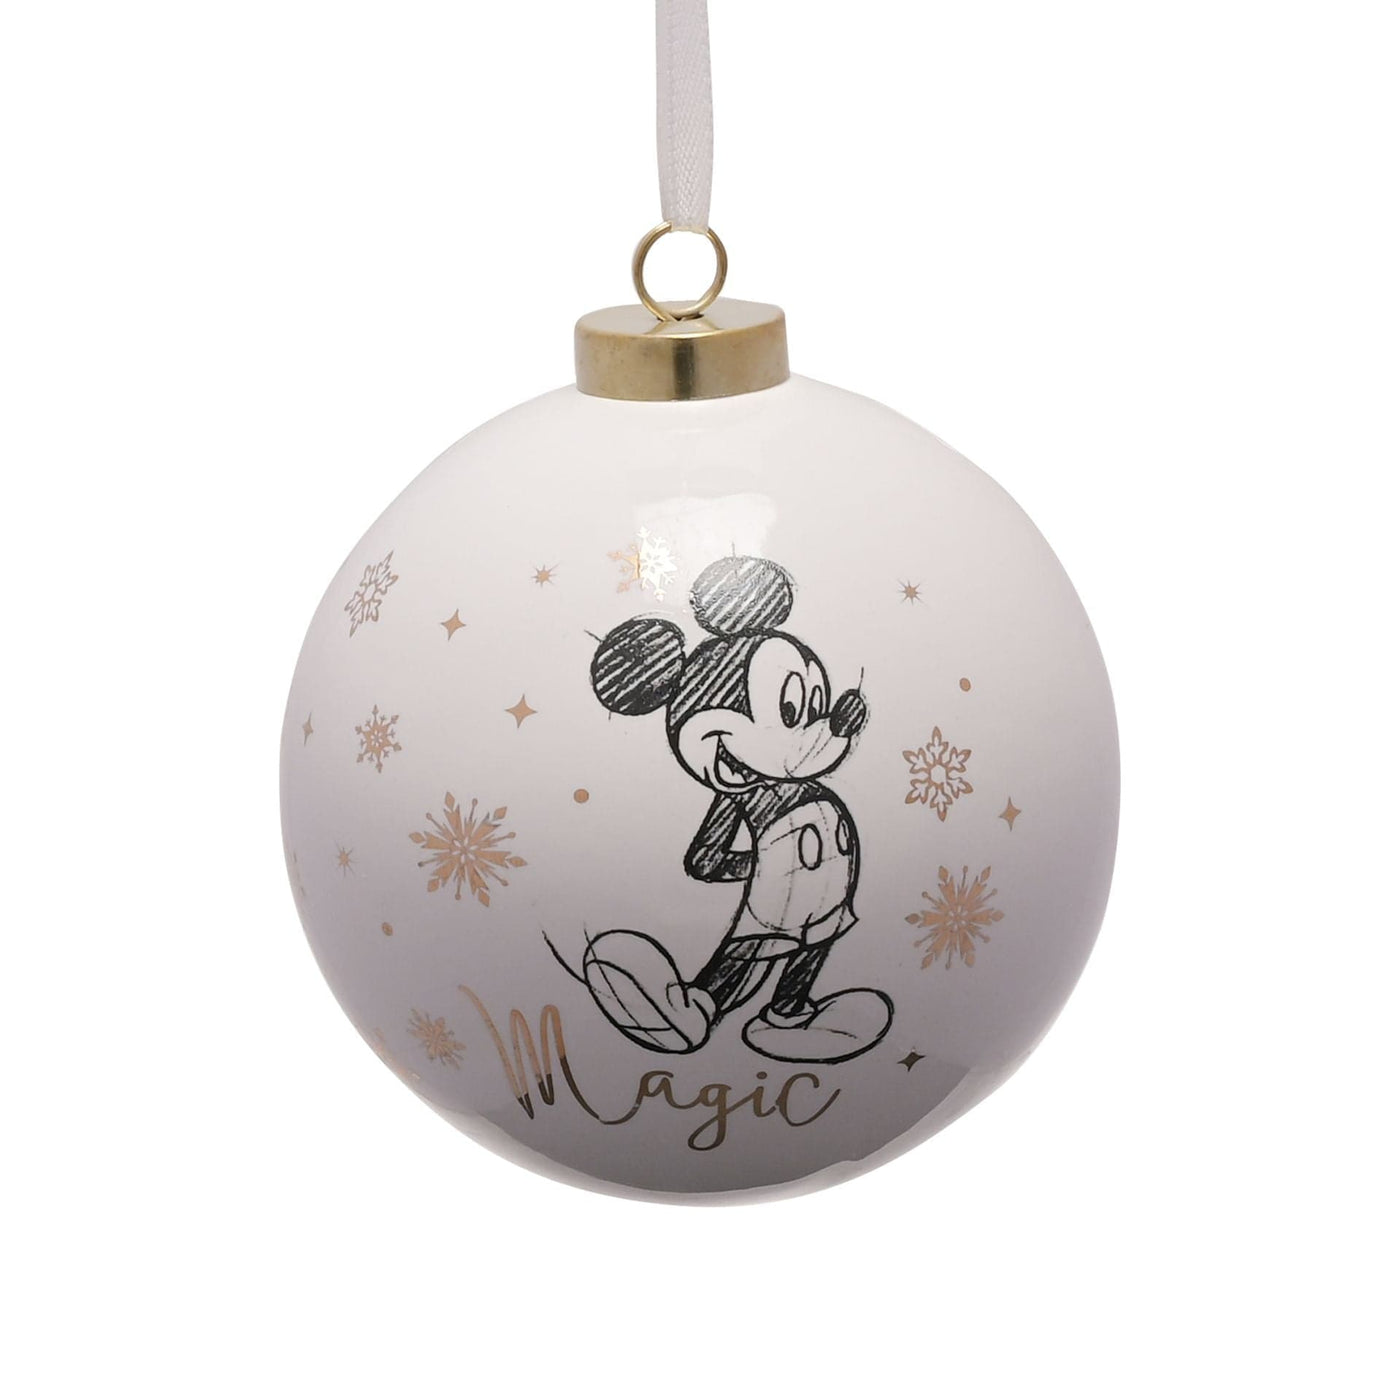 Widdop Gifts Christmas Decorations Disney Mickey Mouse Ceramic Christmas Tree Bauble